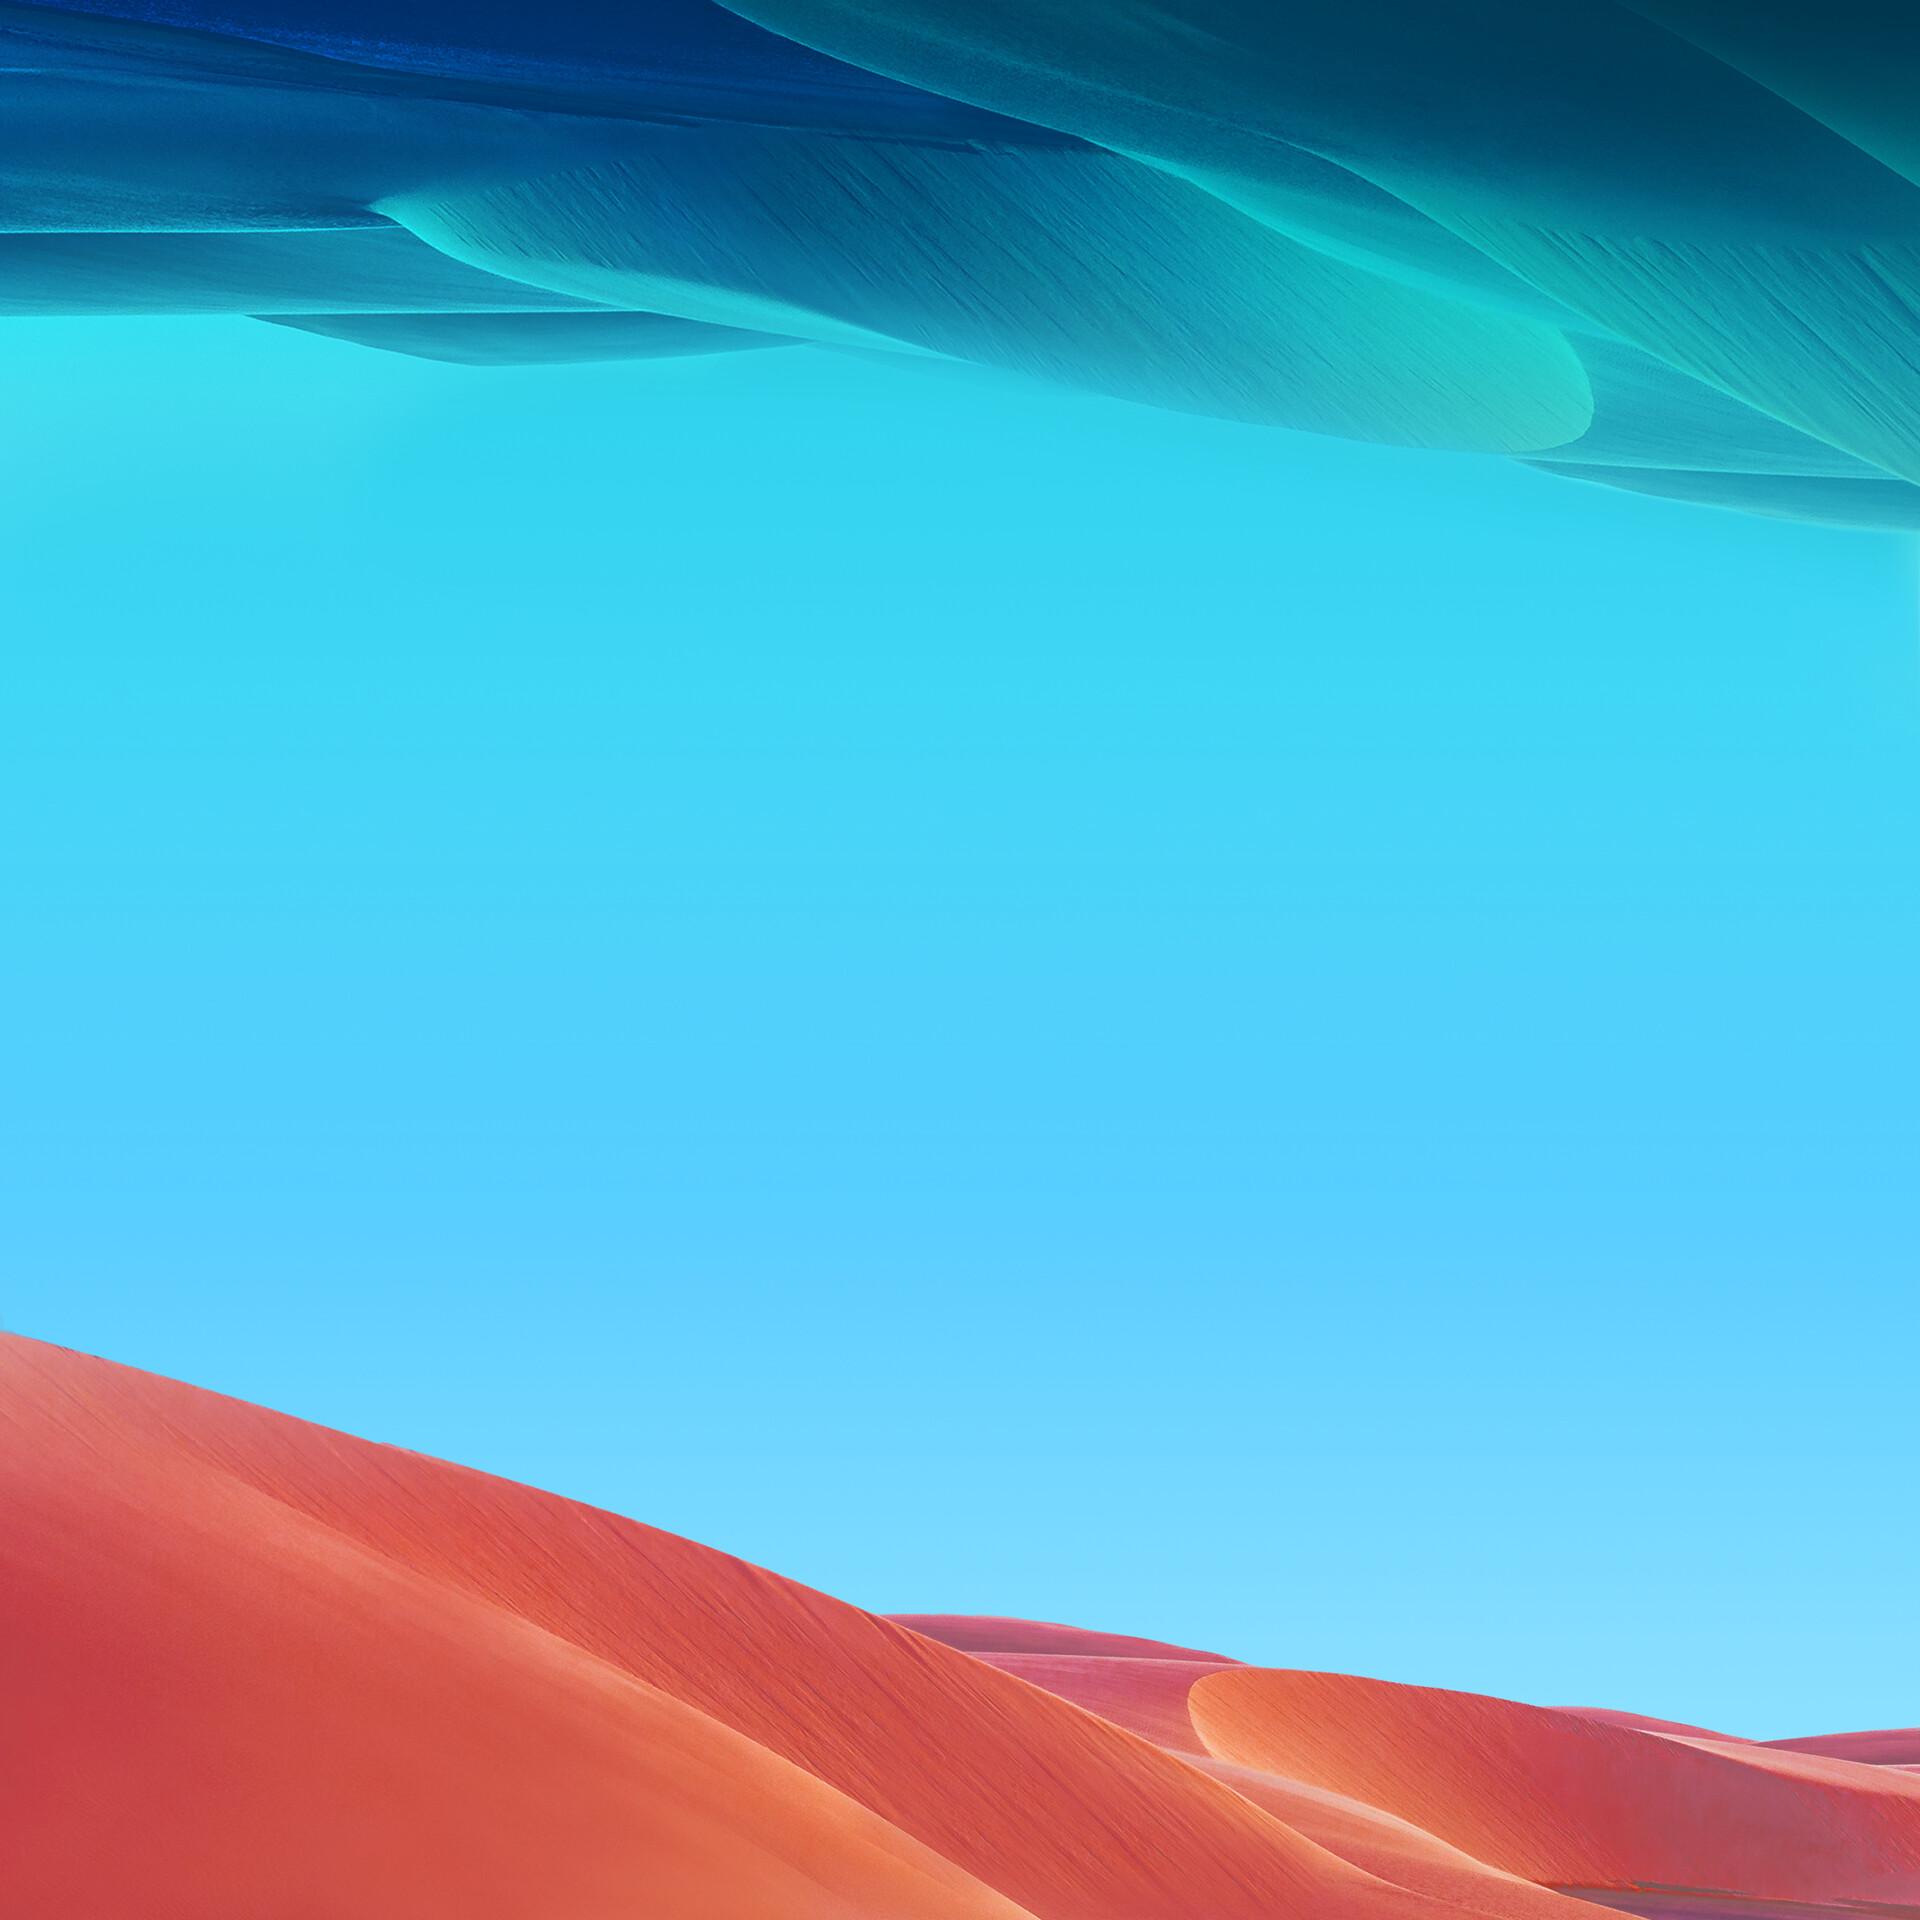 Samsung Galaxy M Galaxy M20 wallpaper now available to download